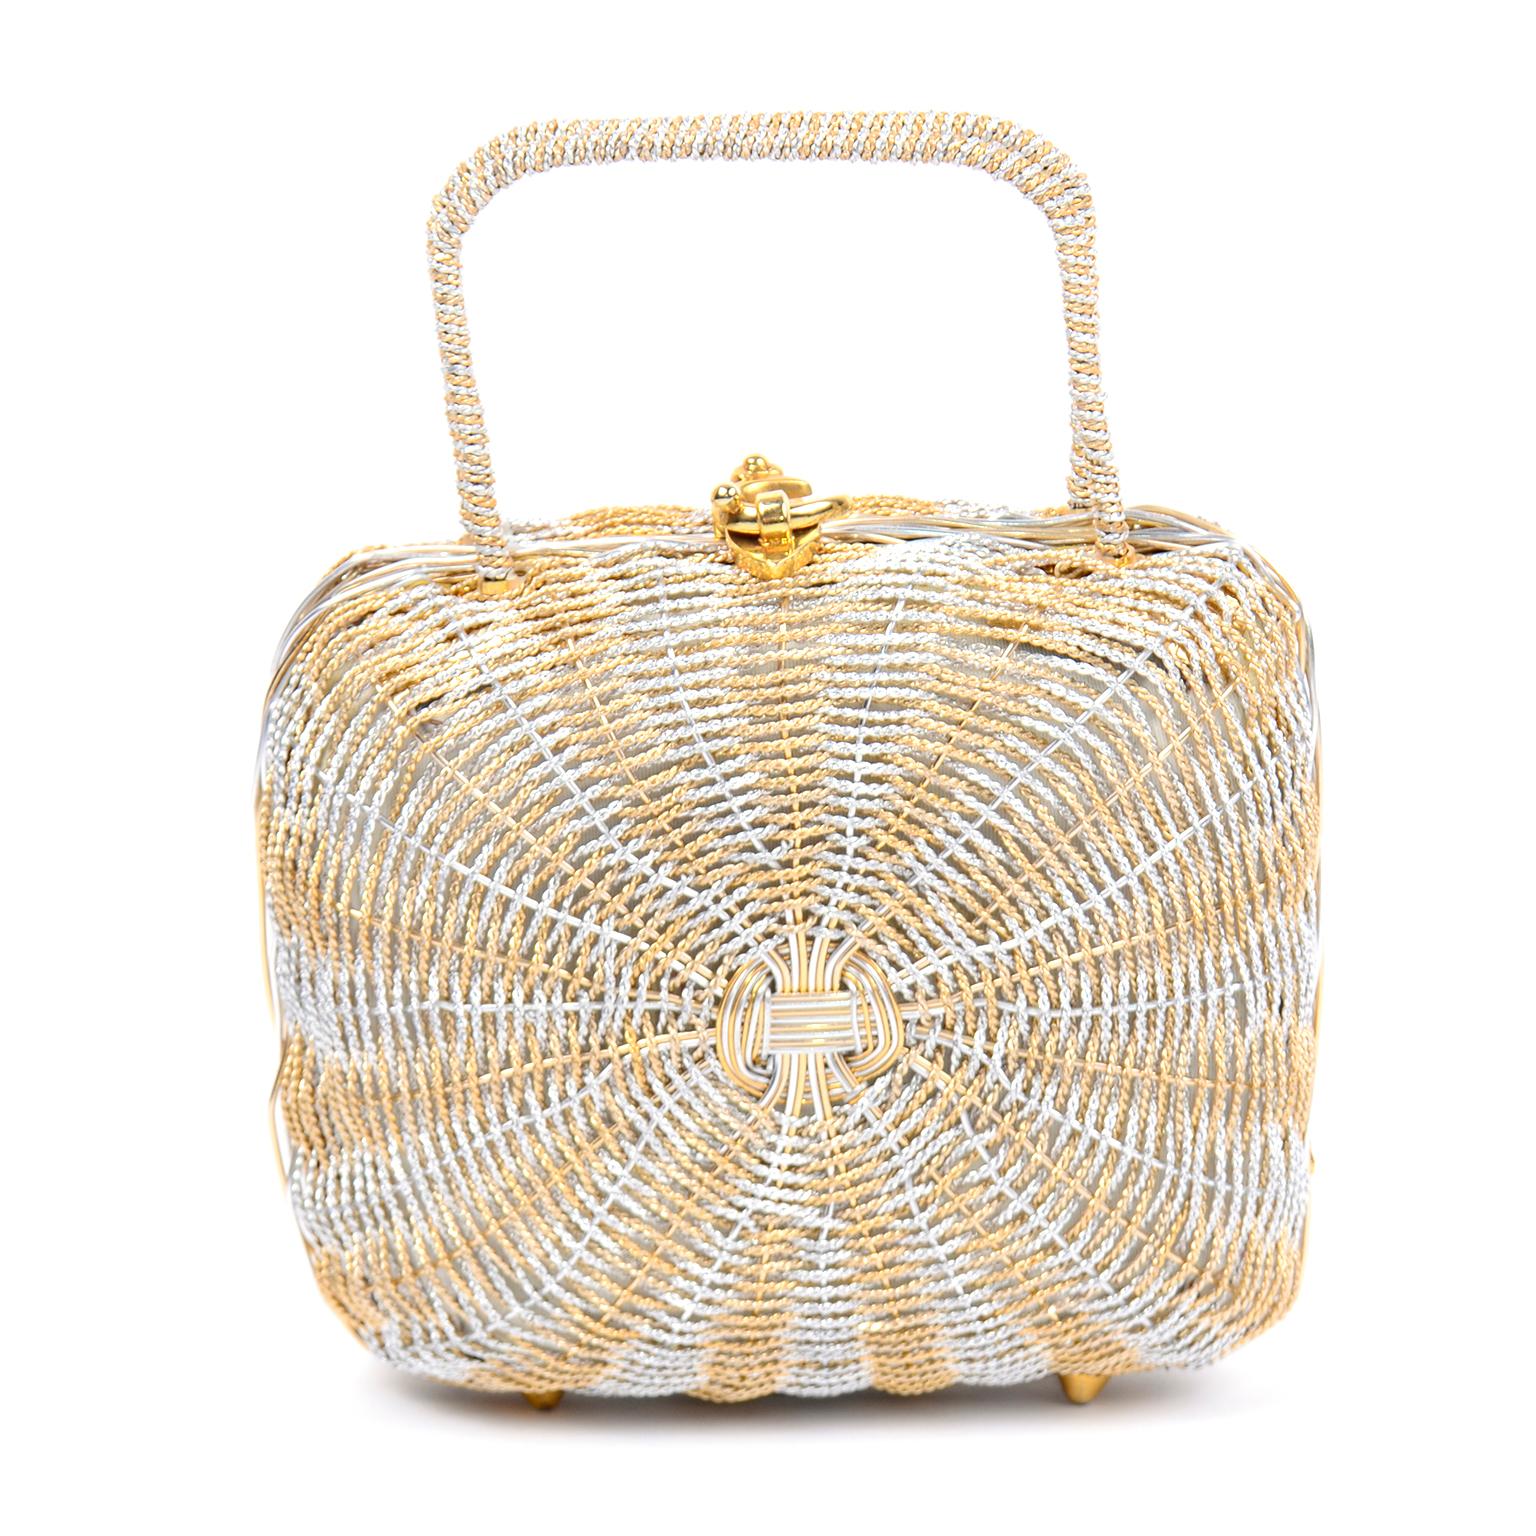 This fabulous vintage Koret mid century  woven silver and gold metallic handbag can be worn during the day or on an evening out.. The bottom of this lovely structured handbag has gold tone feet and there are metal hinges. The inside of the bag is